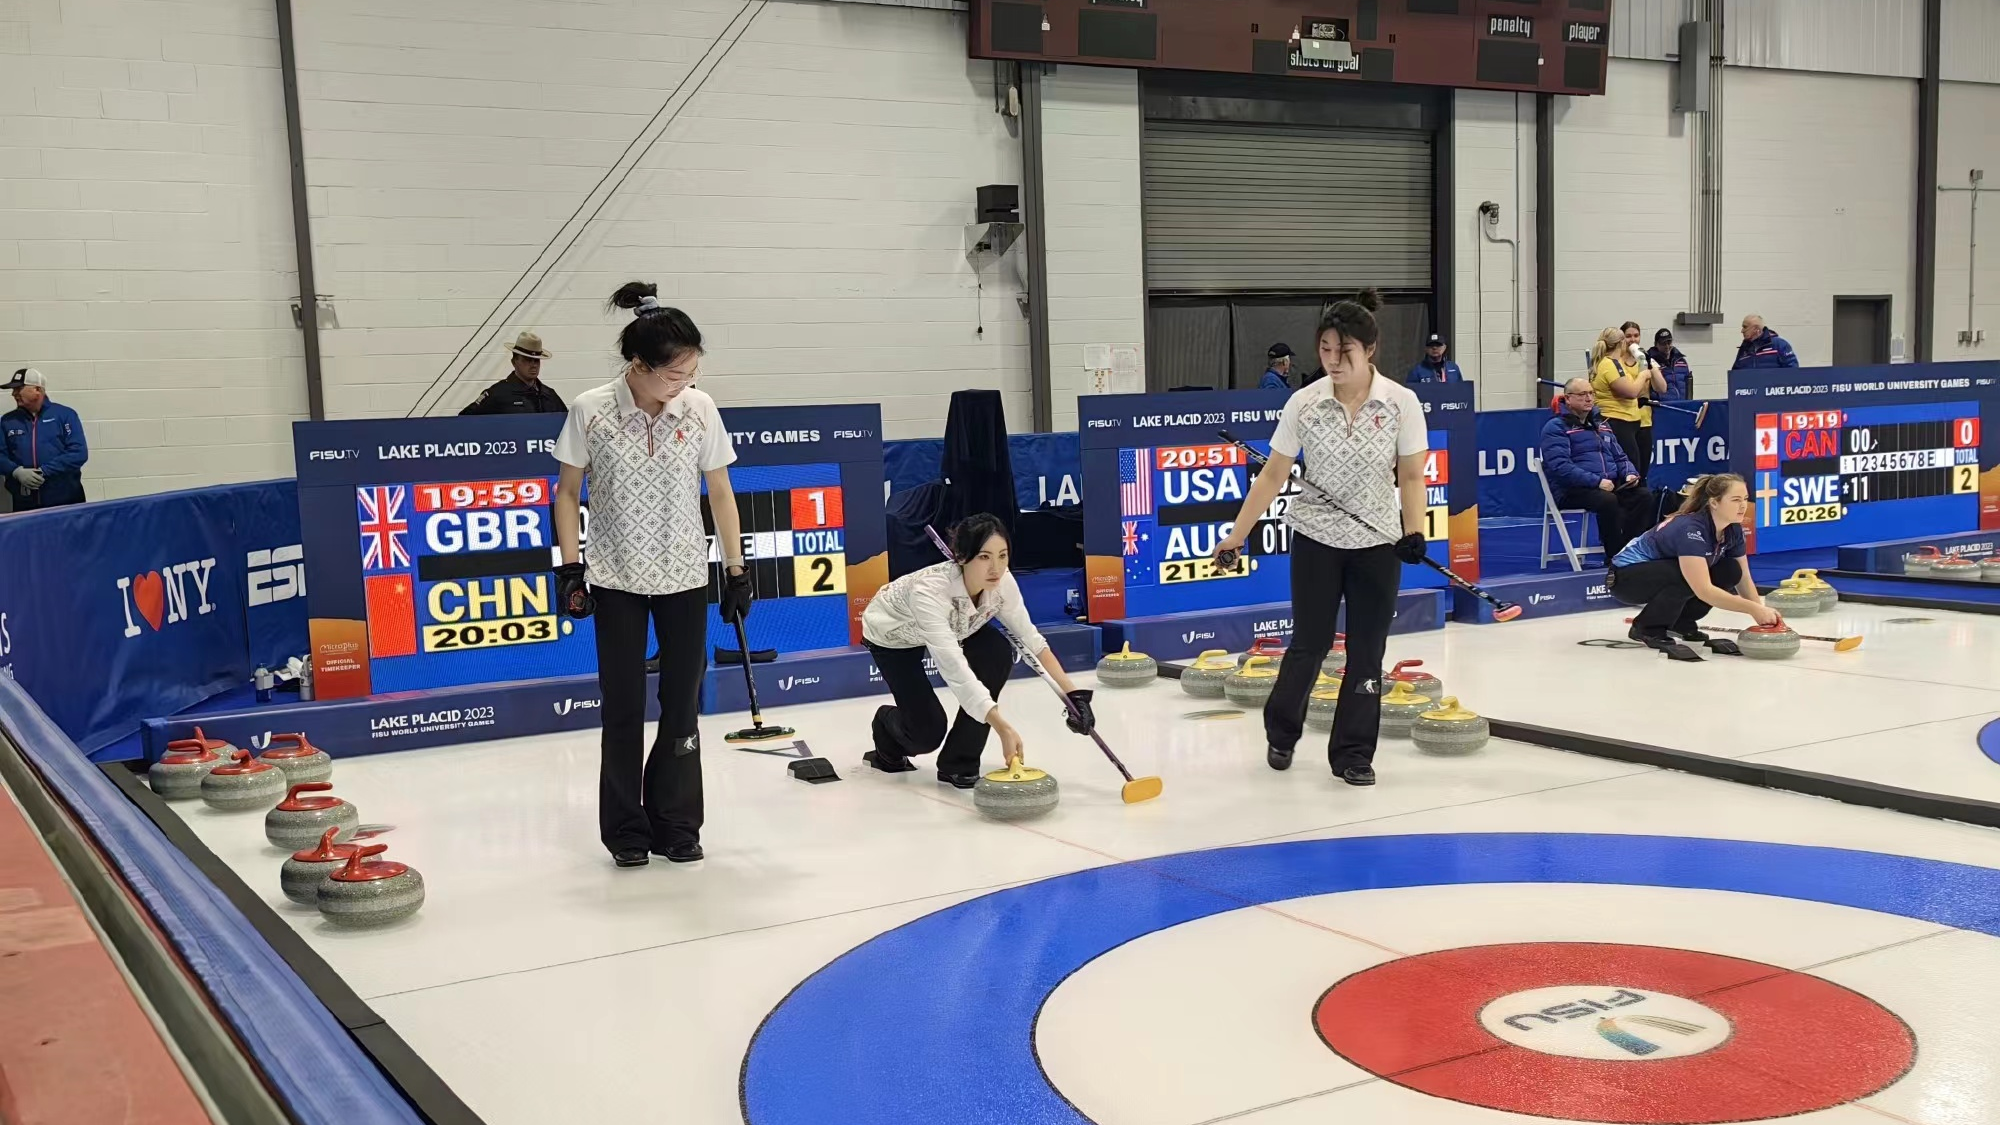 China women's curling team compete against Great Britain at the Winter World University Games in Lake Placid, U.S., January 16, 2023. /People's Daily Sport